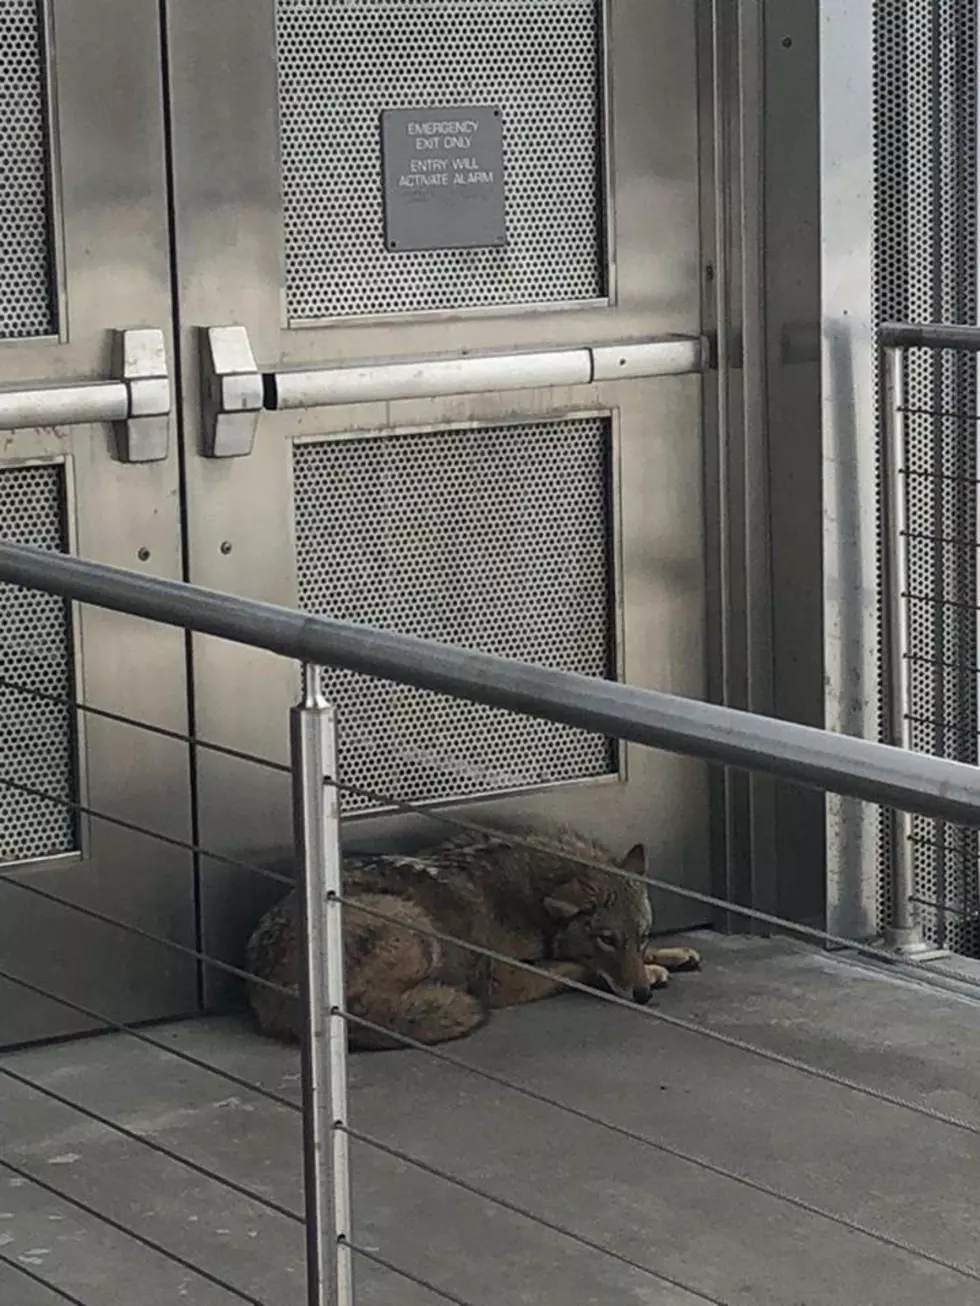 Coyote In Downtown Albany Contained by Police [PHOTO]